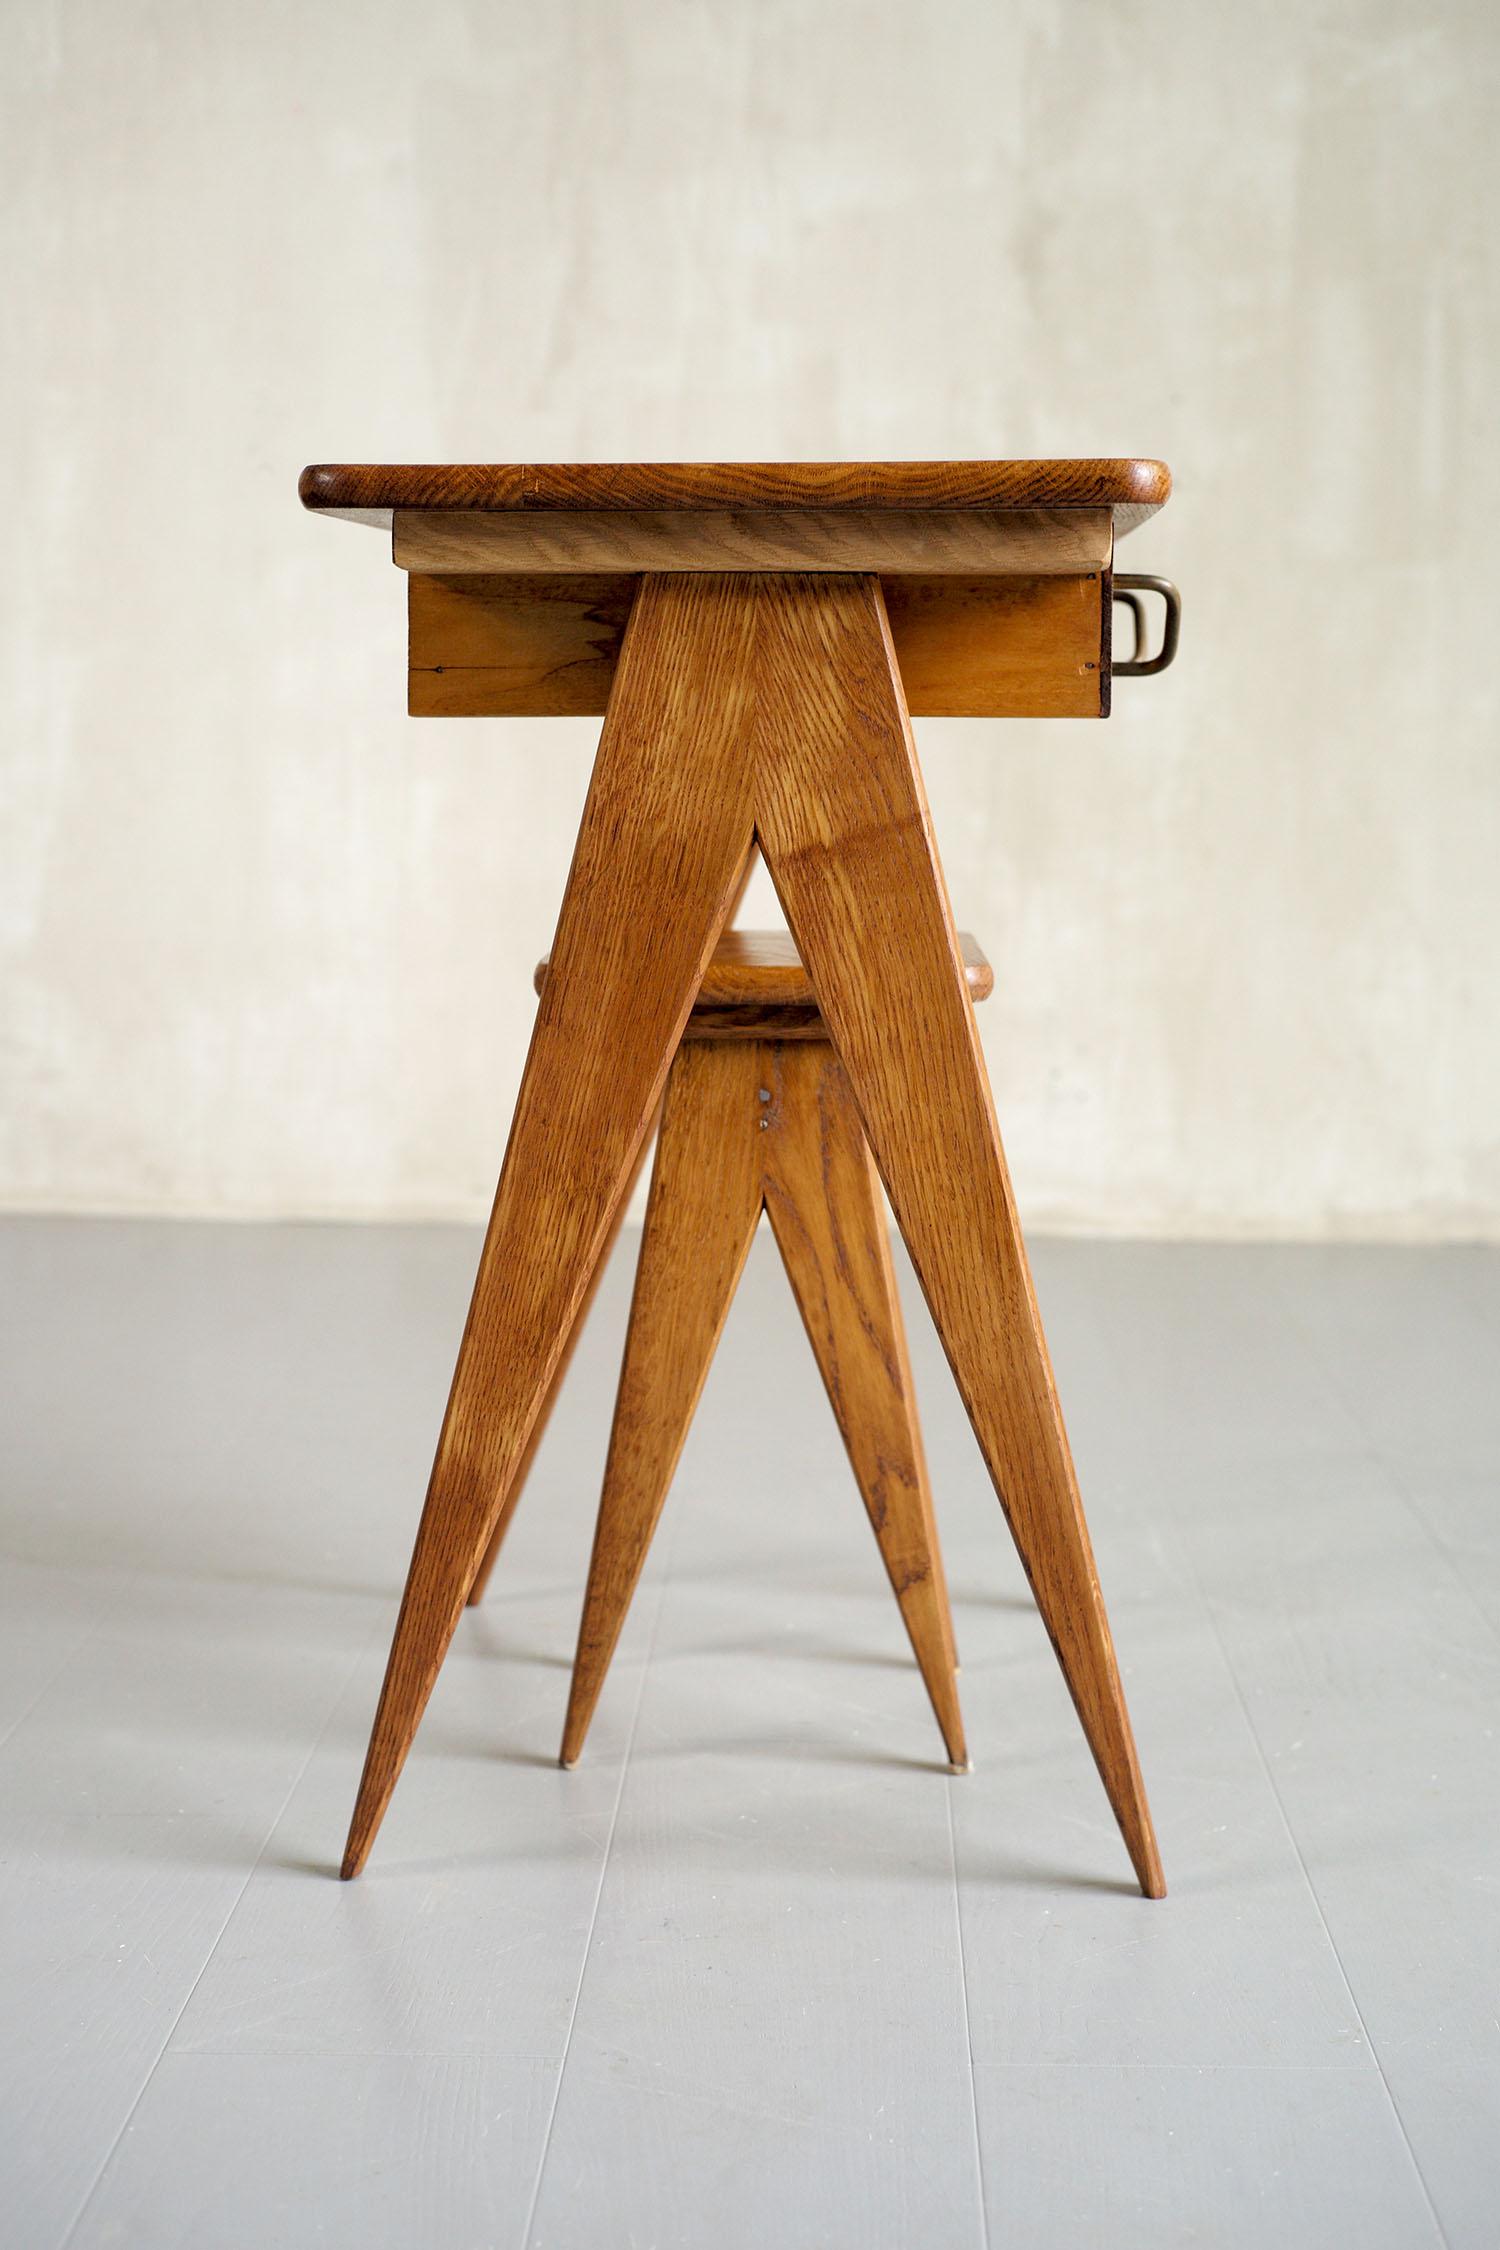 French Compass Desk and Stool, France, 1950